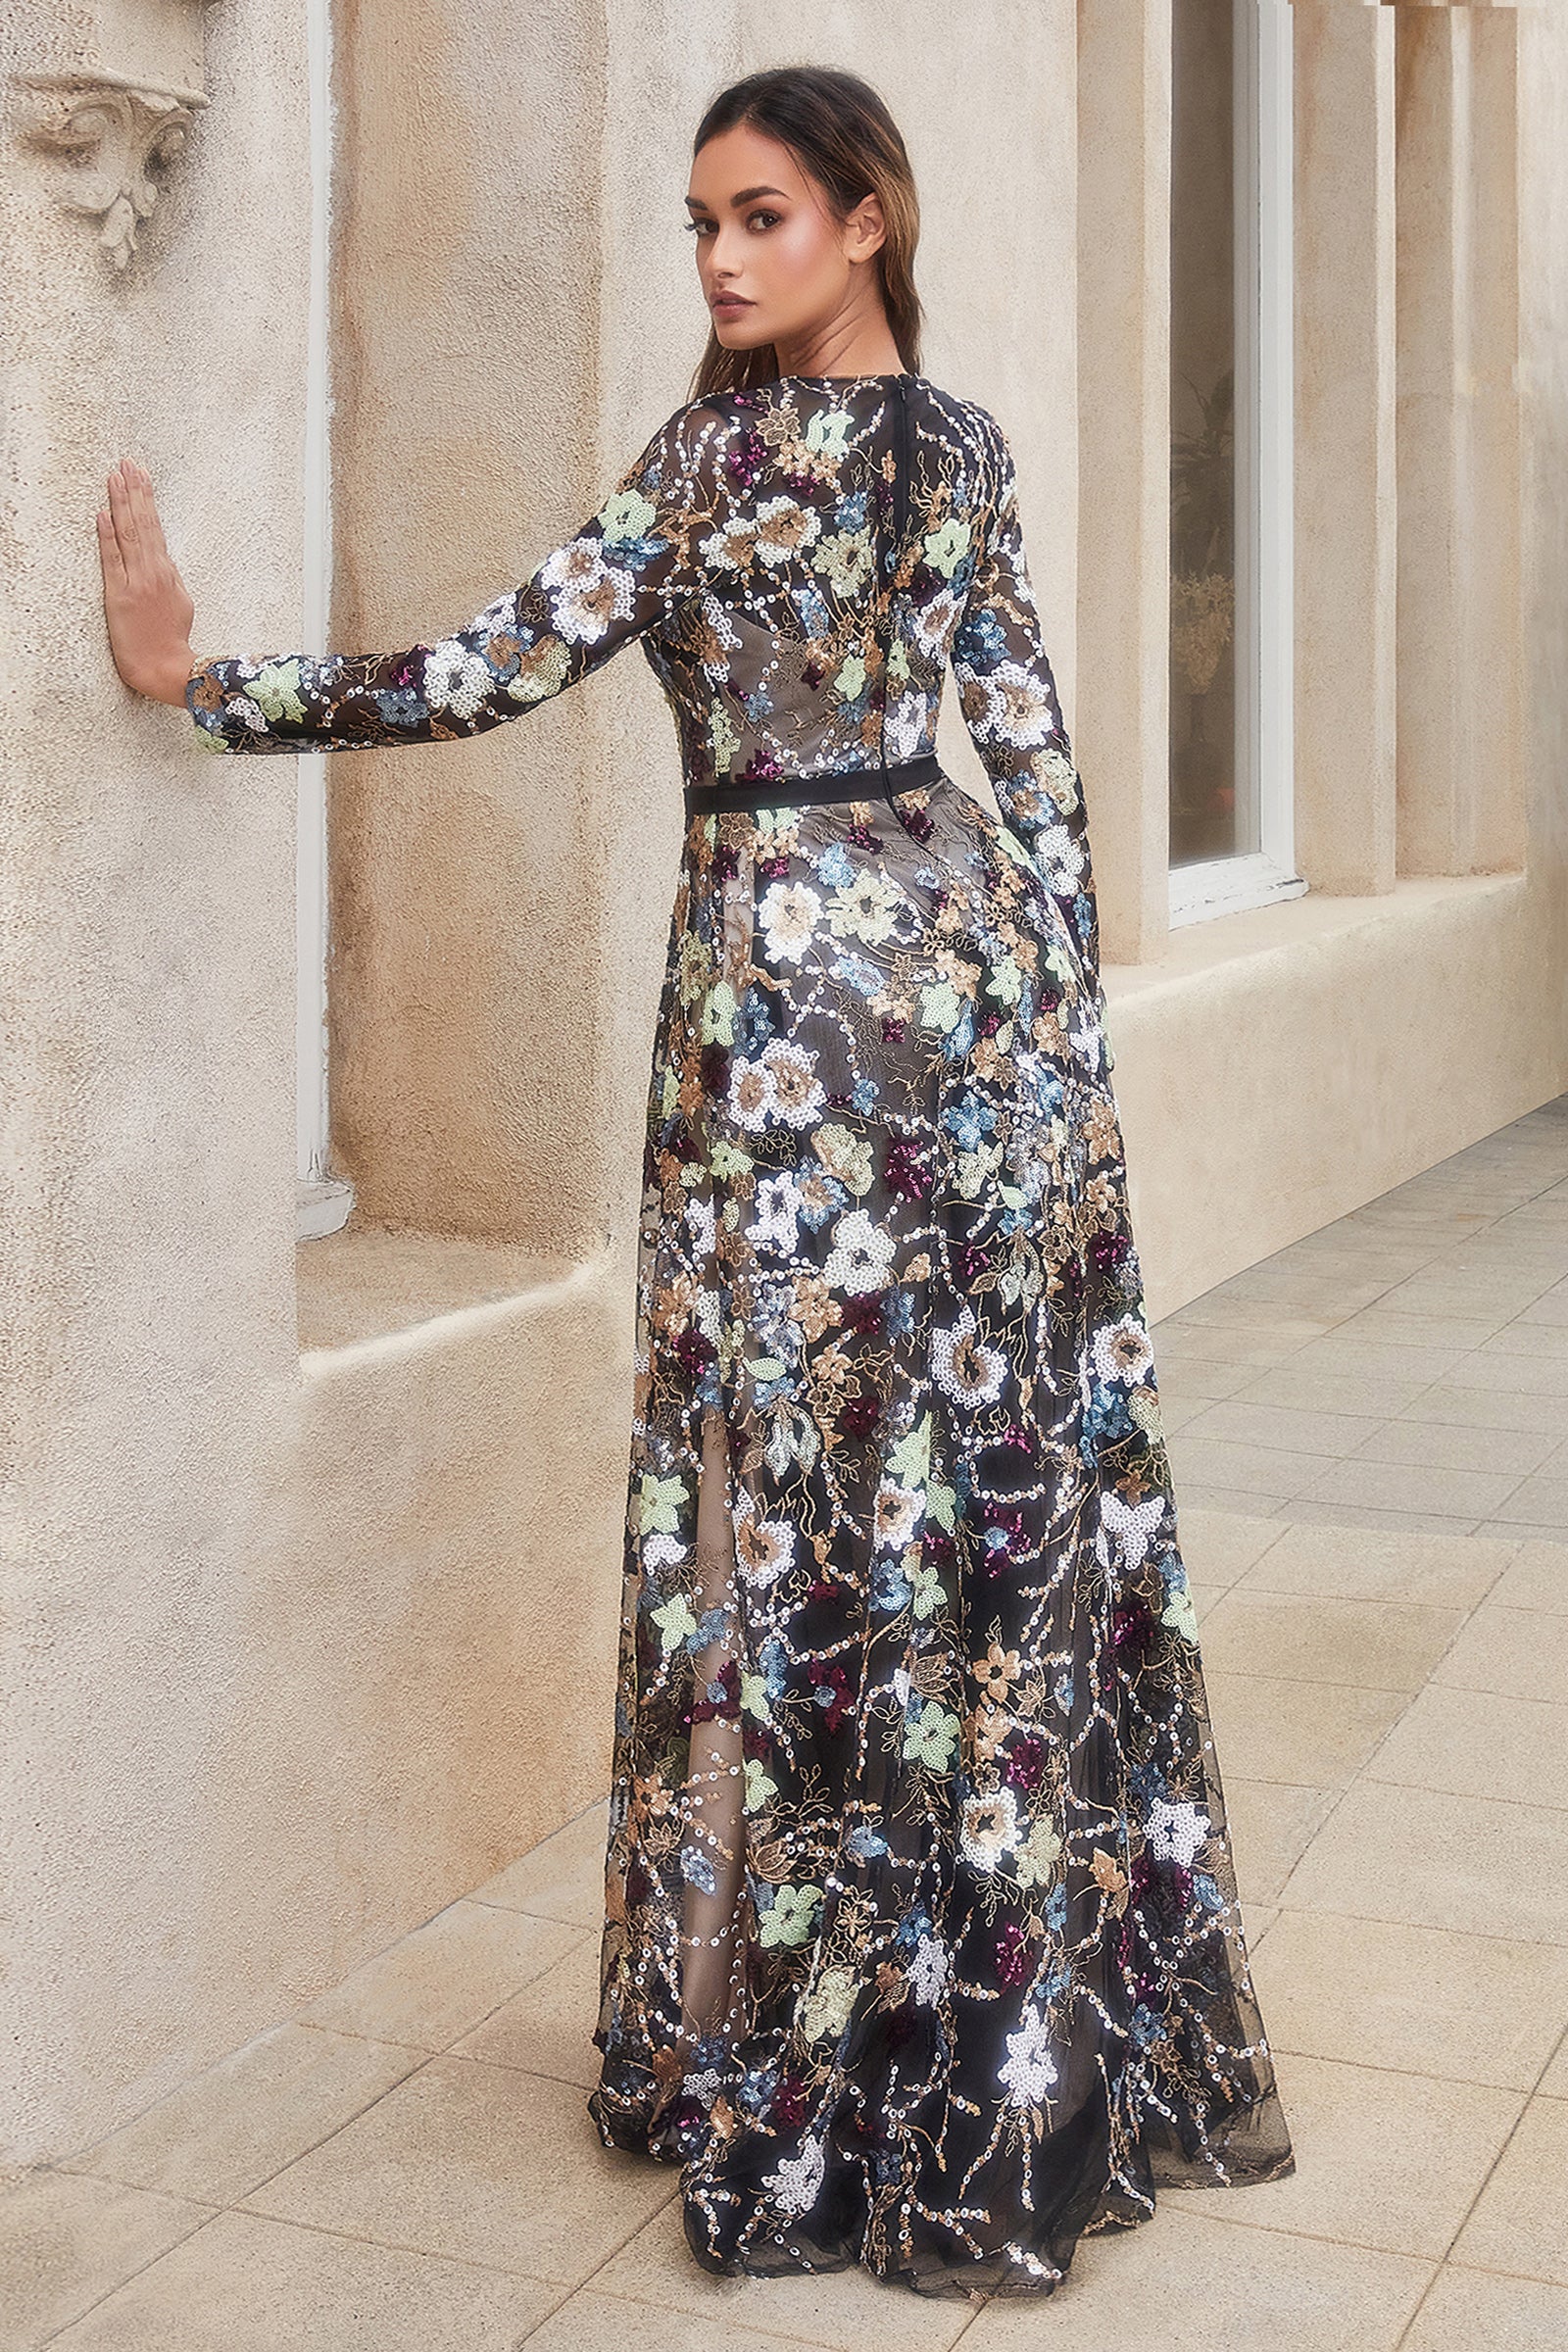 This dreamy dress features a tulle overlay covered in multicolored sequin print florals that evoke the beauty and serenity of a garden—the perfect look for any elegant event. The long sleeves add modest appeal, while the satin belt creates a flattering fi